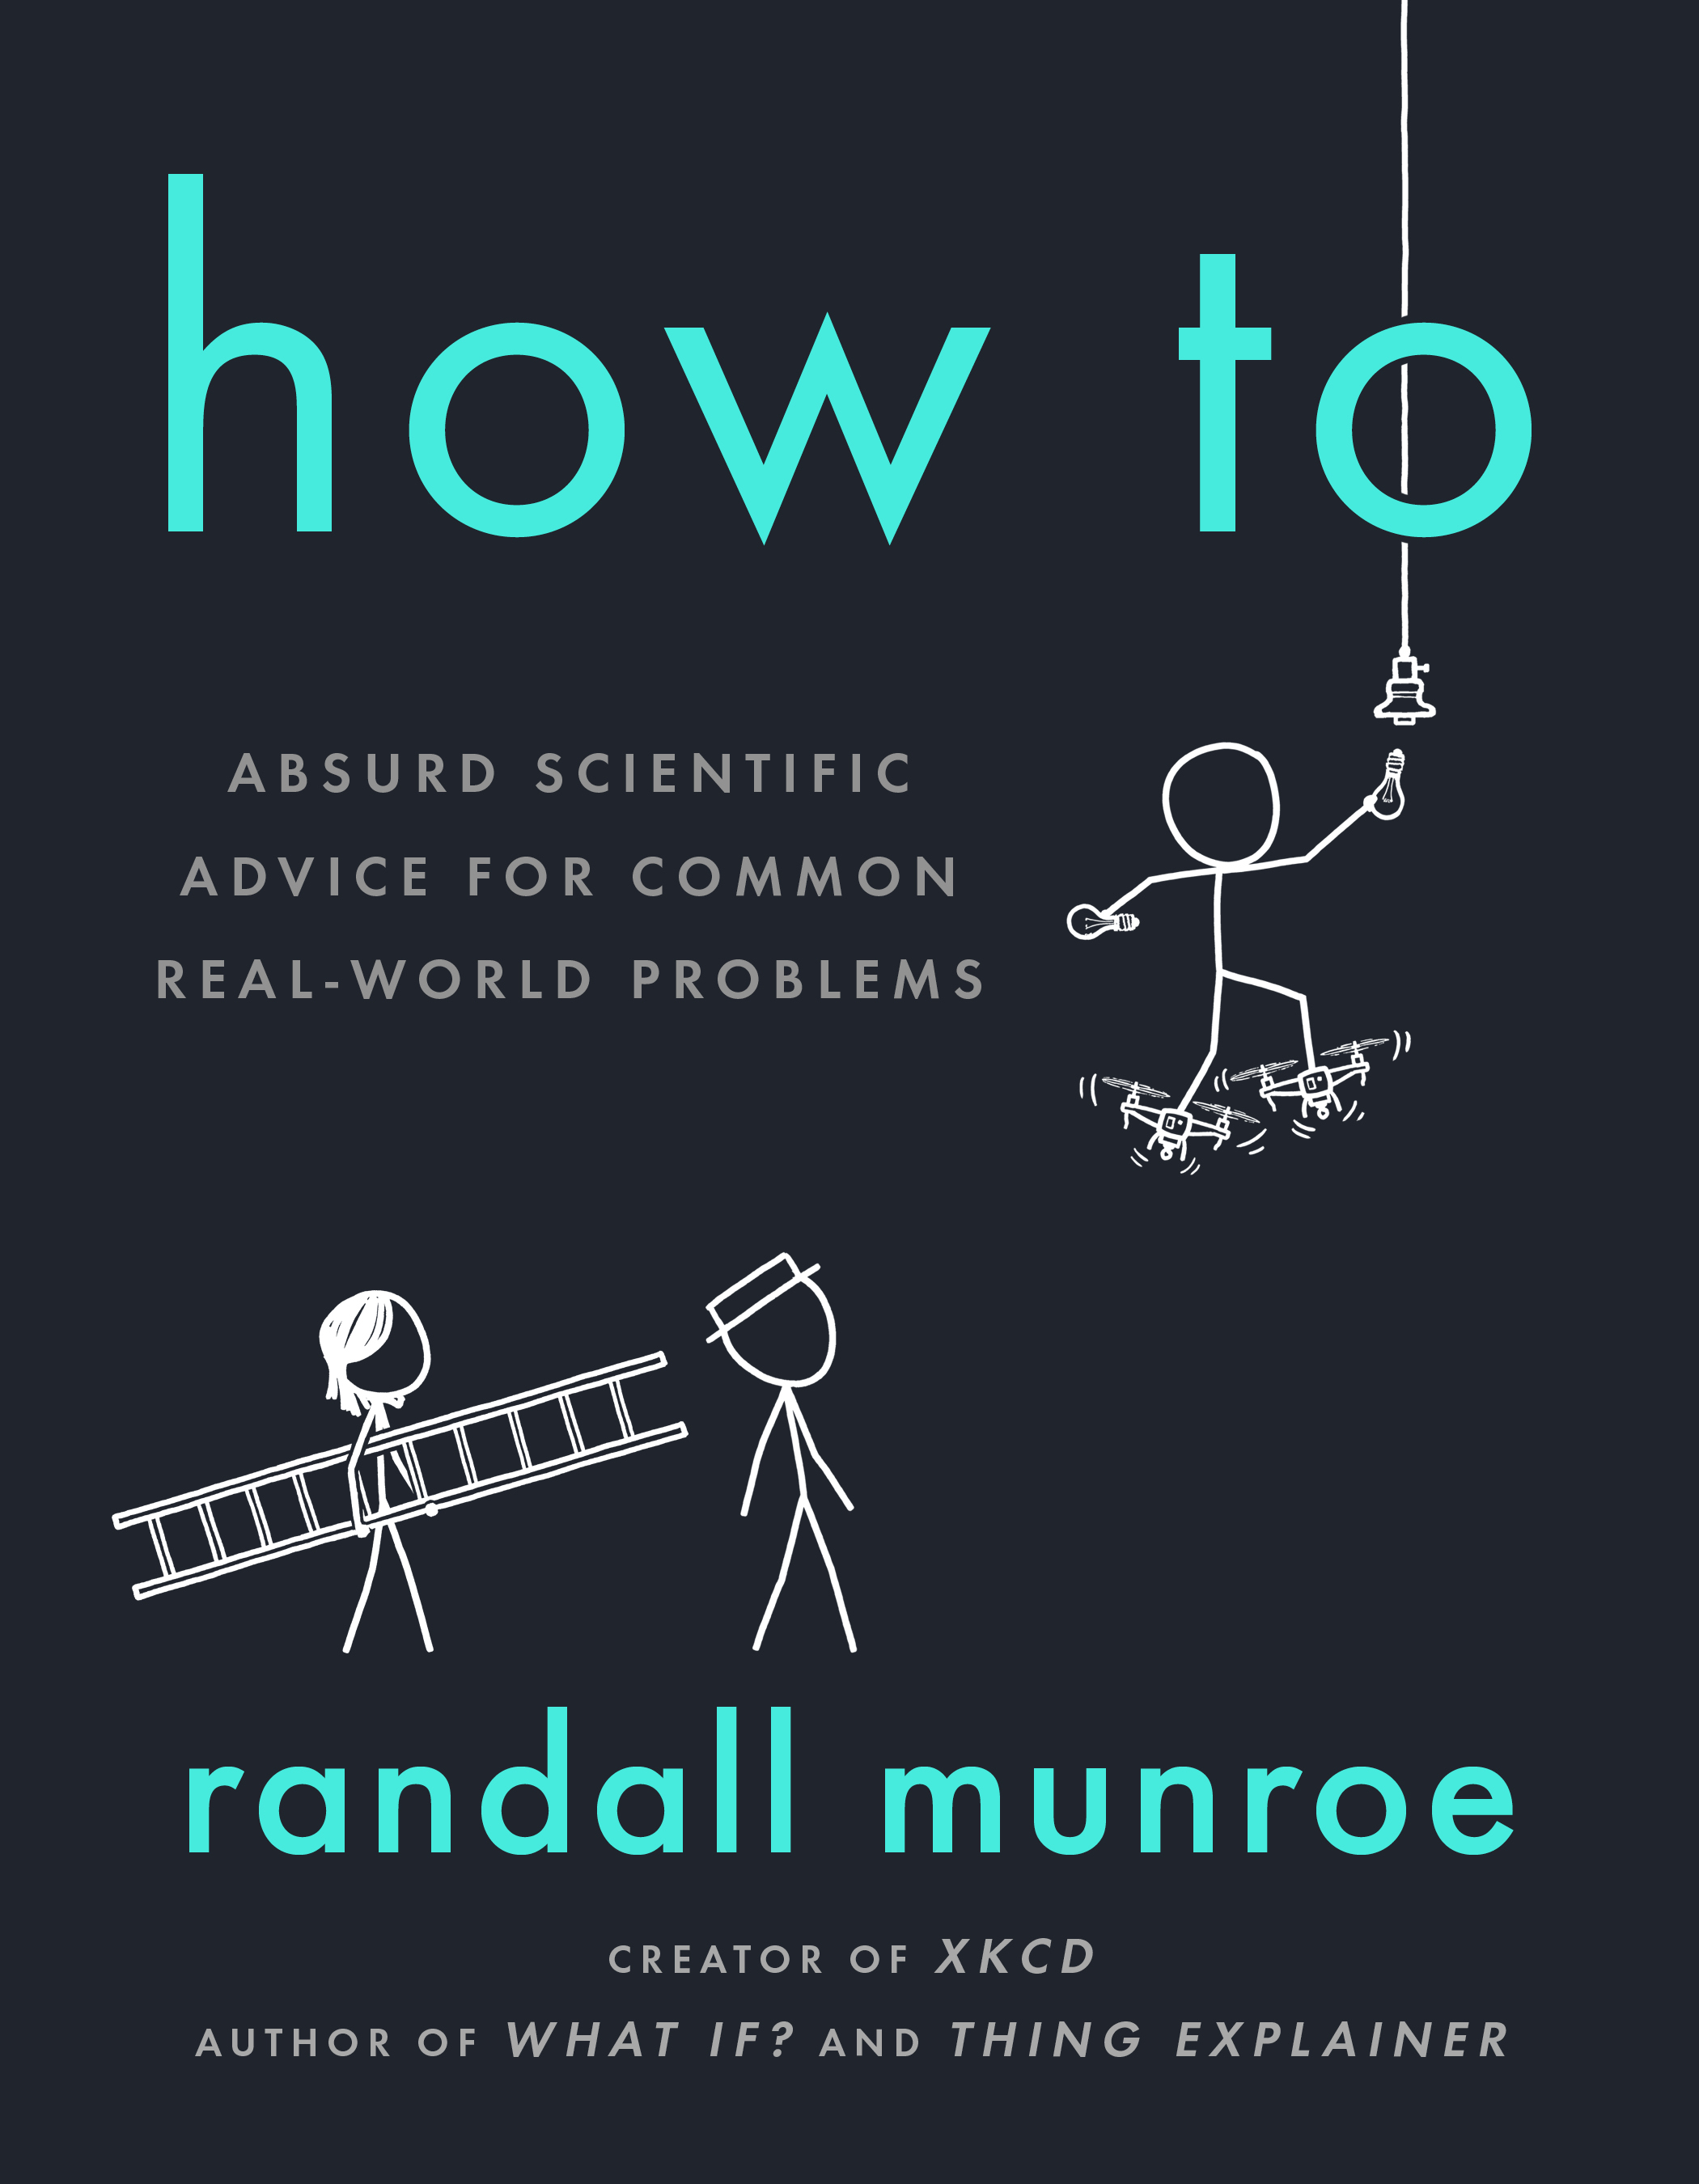 How To: Absurd Scientific Advice For Common Real-World Problem